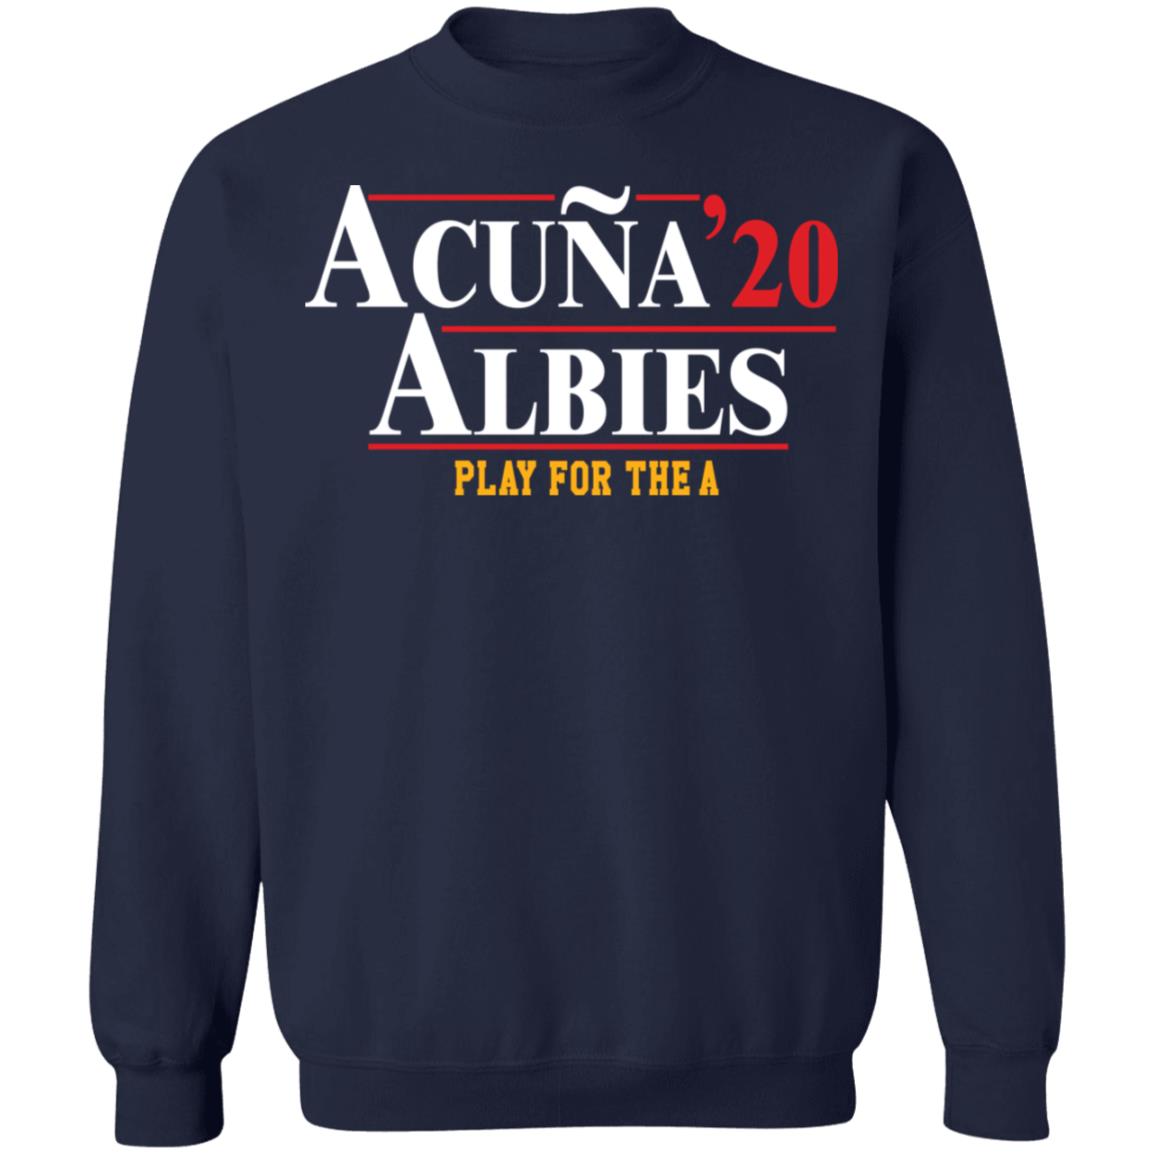 acuna albies 20 | Essential T-Shirt